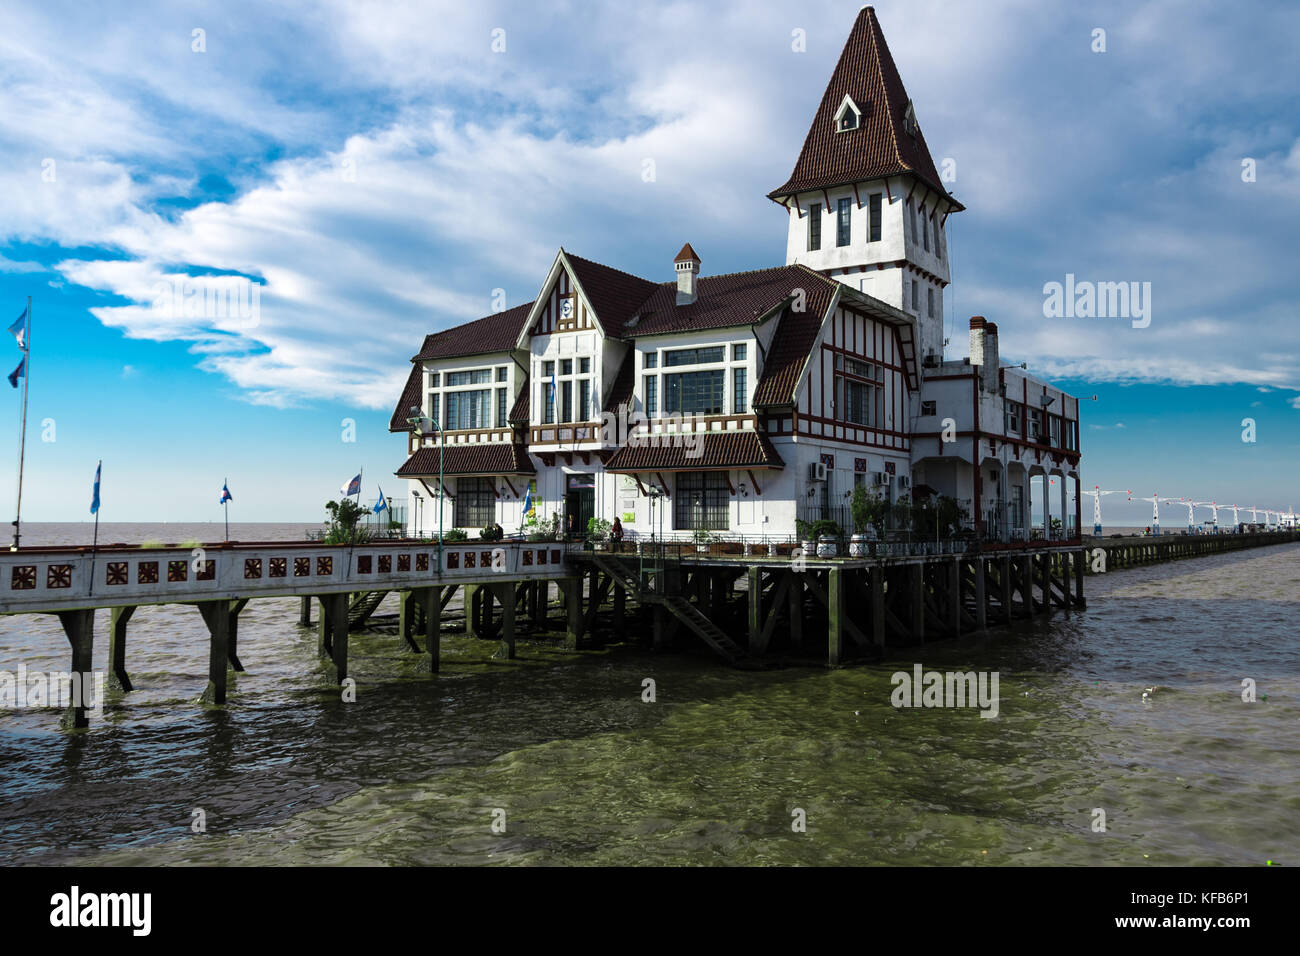 Lovely house by the pier Stock Photo